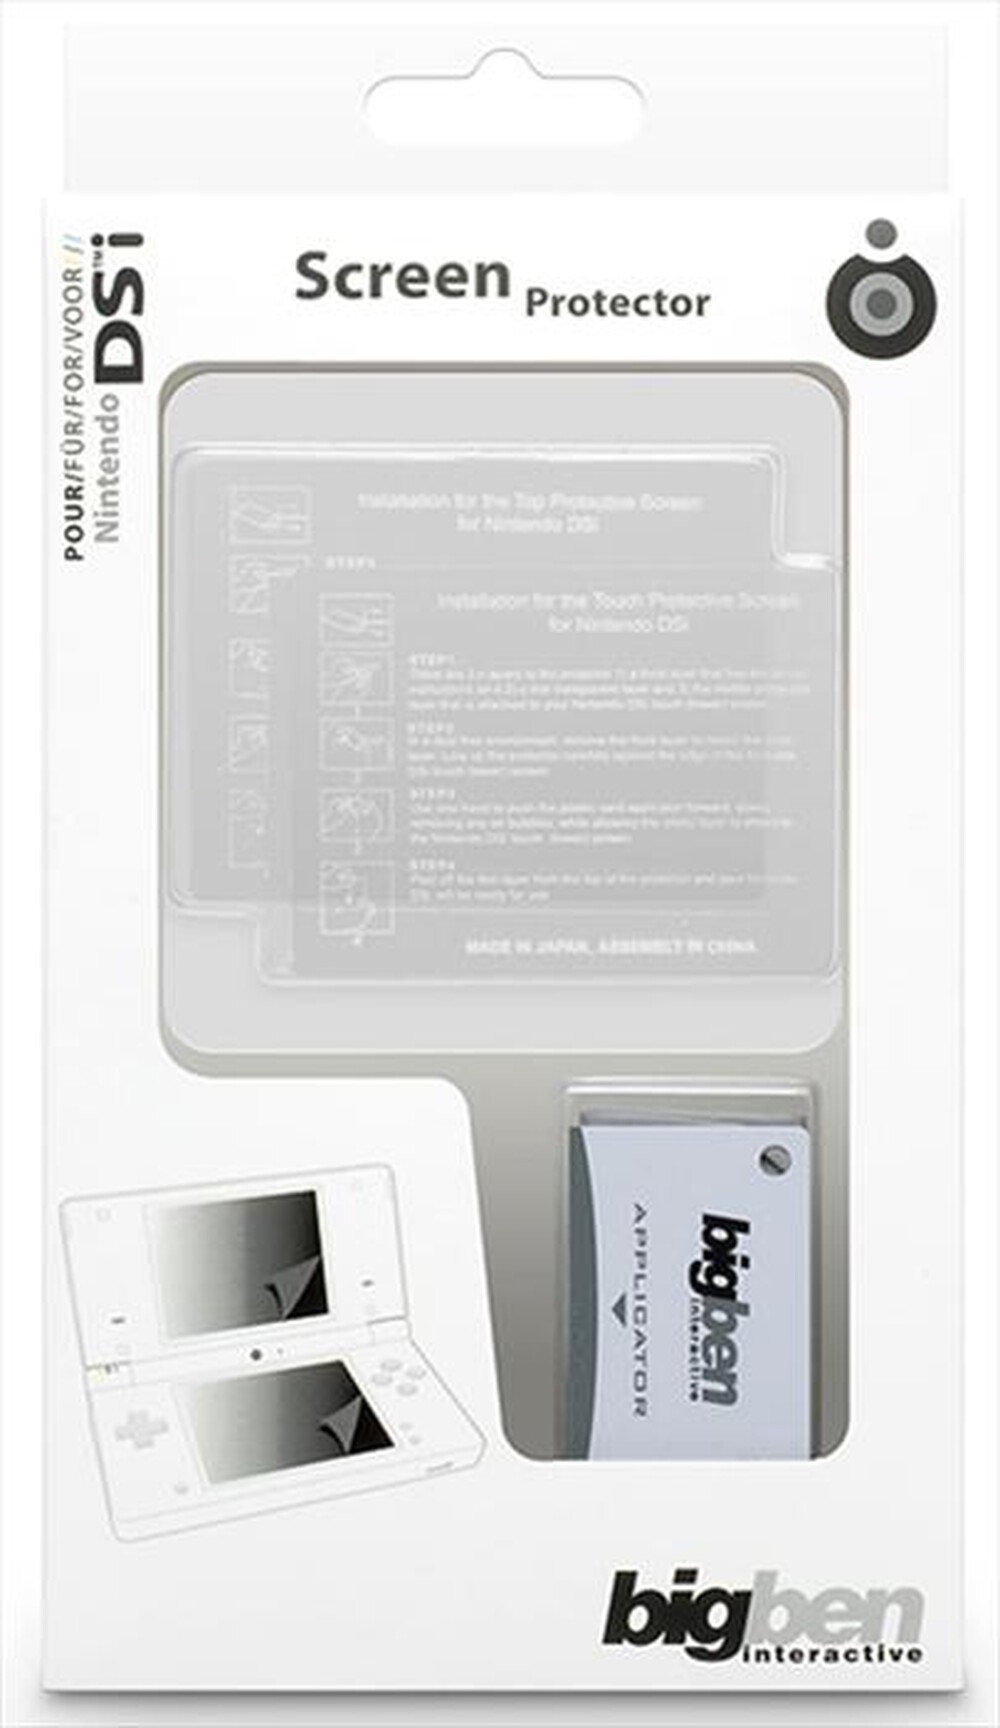 "NEW AVE - Screen Protector DSi - "